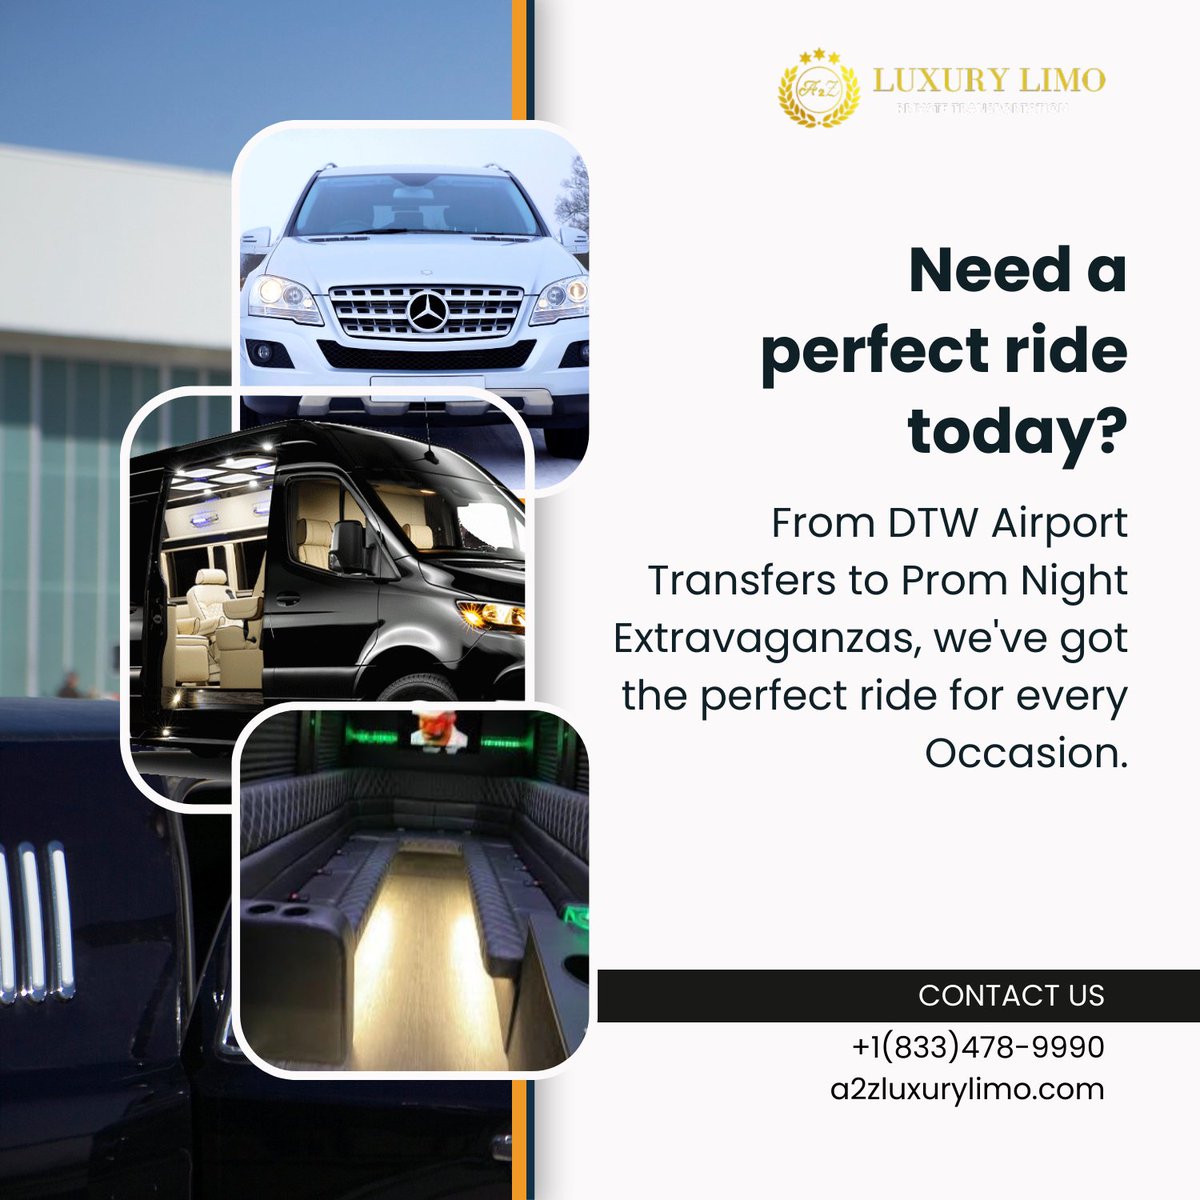 Need a perfect ride today?
From DTW airport transfers to prom night extravaganzas, we've got the perfect ride for every occasion.

#RideInStyle #ArriveInLuxury #PerfectRide #DTWTransfers #LuxuryTransportation #MemorableJourneys #ElegantArrivals #TravelInComfort